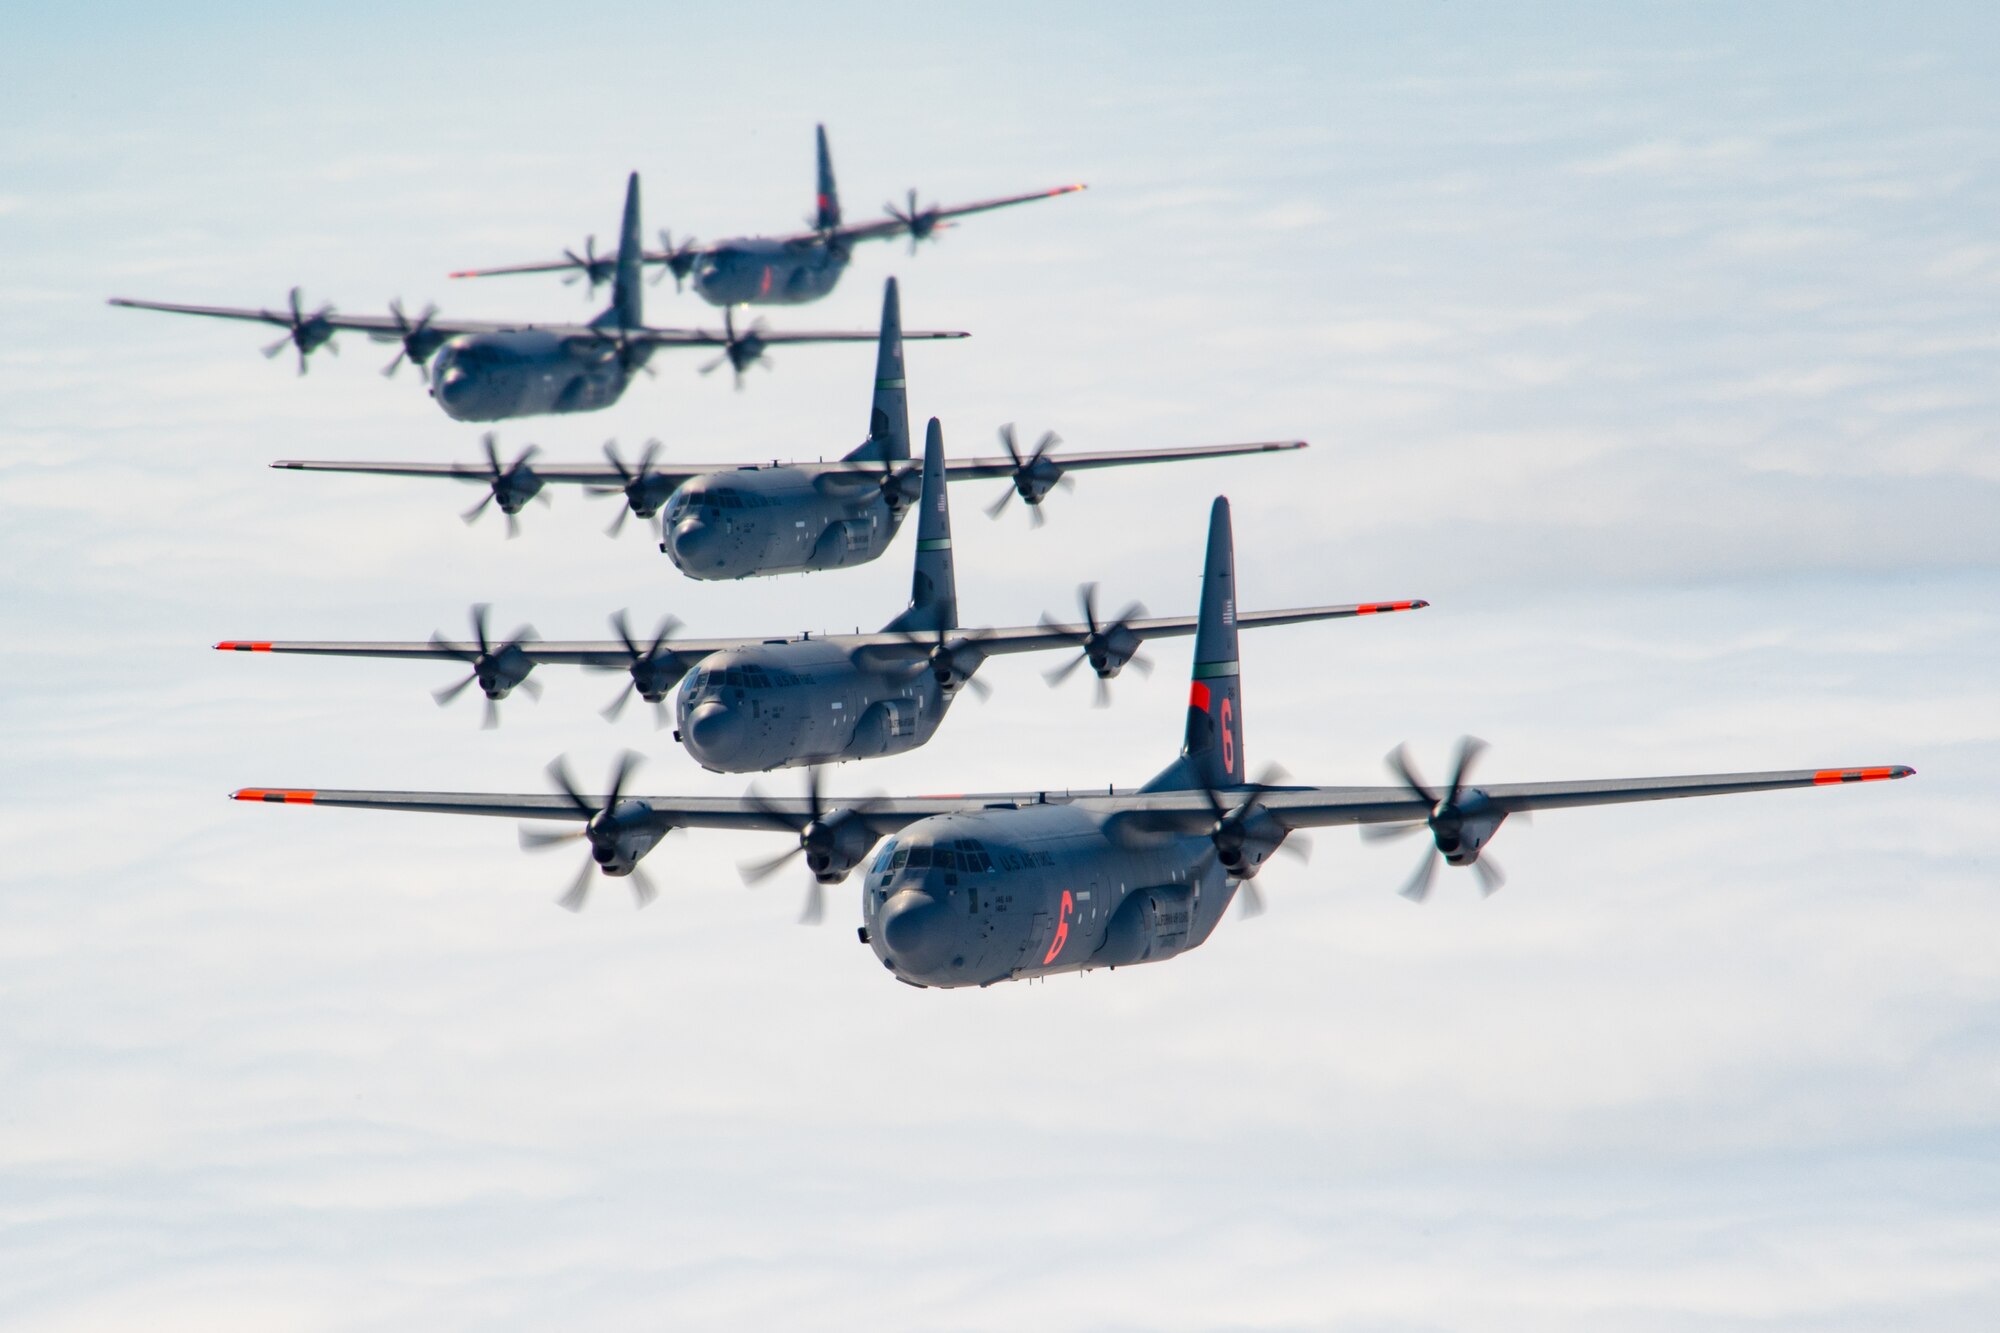 5 of 6 California Air National Guard C-130J Super Hercules aircraft fly in tight formation over the Pacific Ocean, California. May 27, 2020. California Air National Guard maintainers from the 146th Maintenance Group and aircrew from the 115th Airlift Squadron, collaborated to accomplish the launching of 6 C-130J Super Hercules aircraft for the first time in over 20 years U.S. Air National Guard by Tech. Sgt. Nieko Carzis.